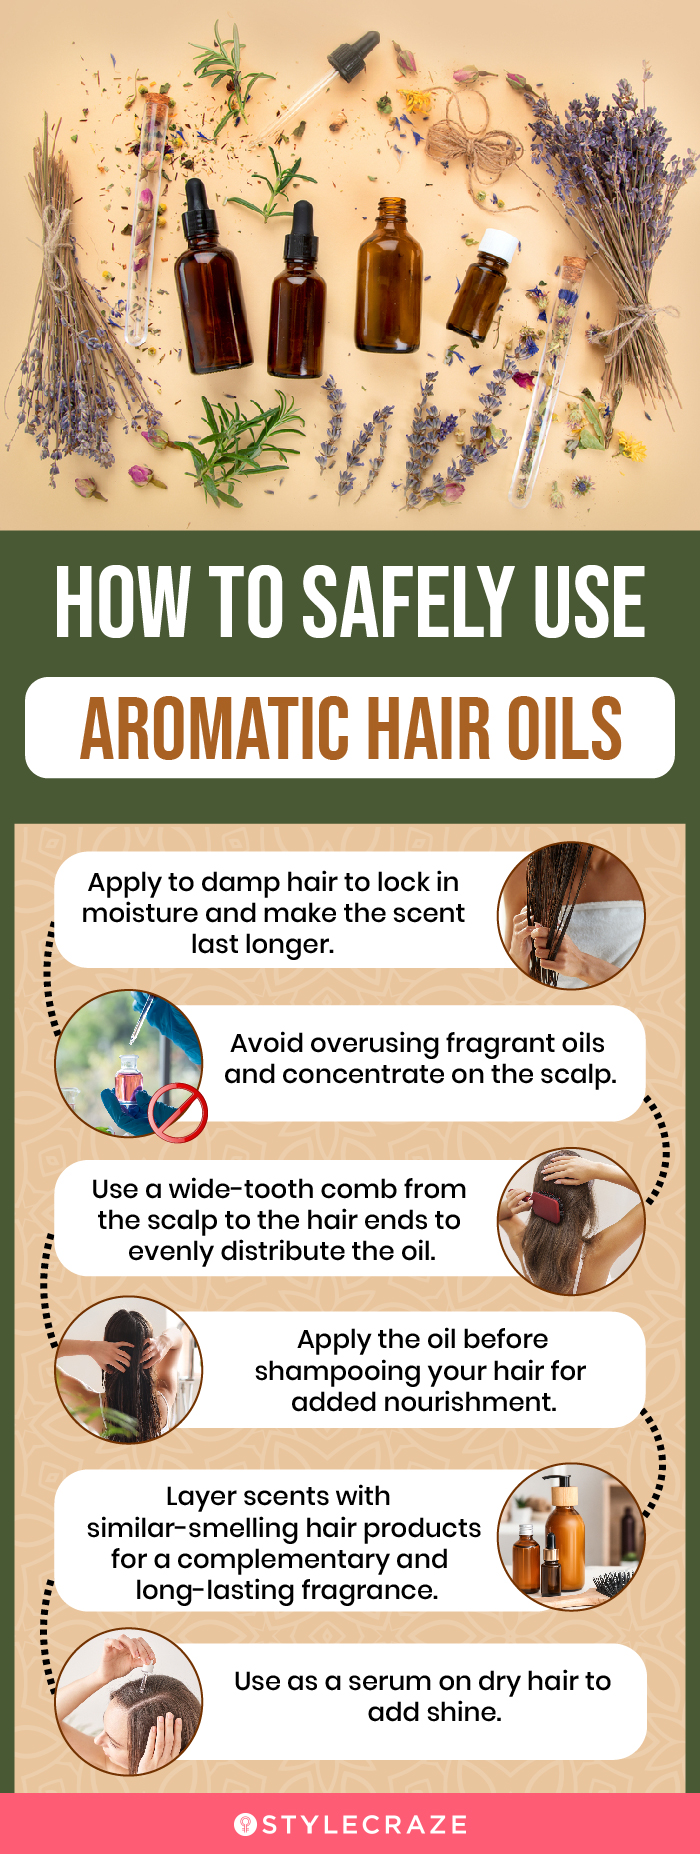 How To Safely Use Aromatic Hair Oils (infographic)